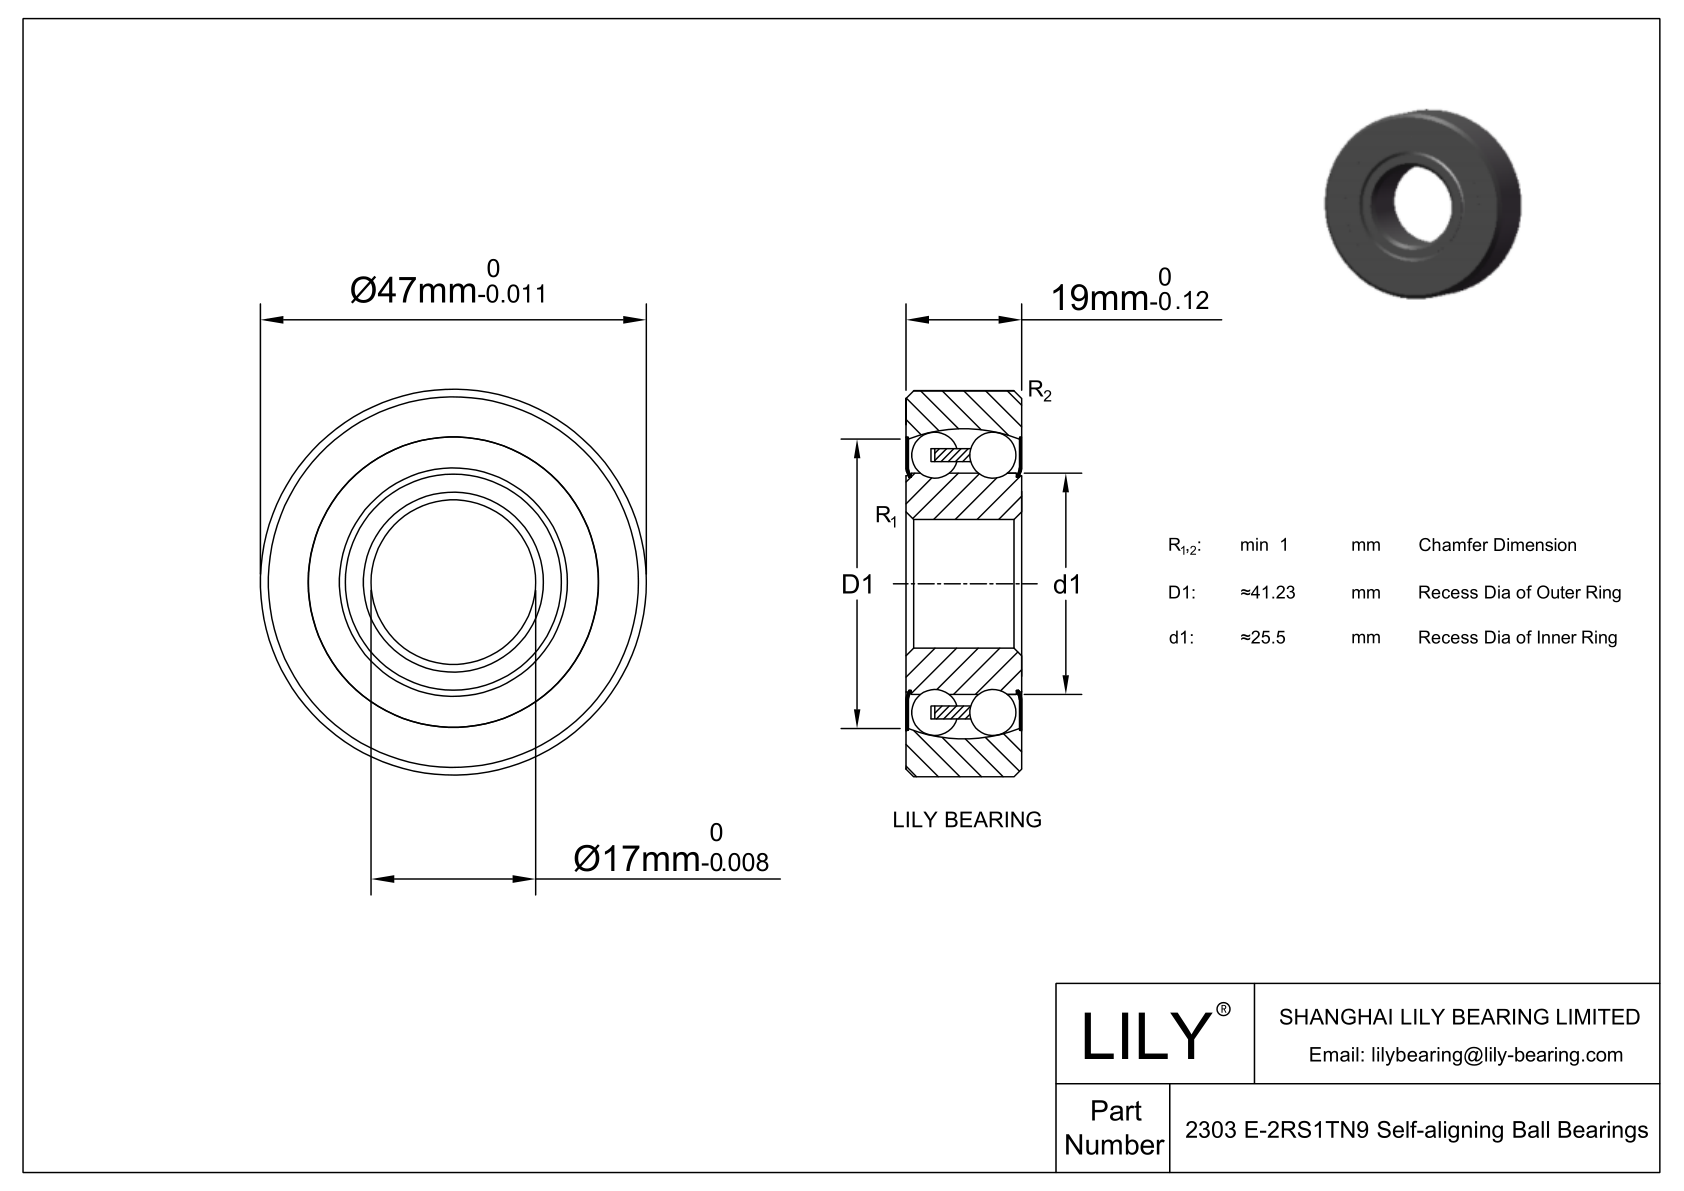 S2303 E-2RS1TN9 Stainless Steel Self Aligning Ball Bearings cad drawing